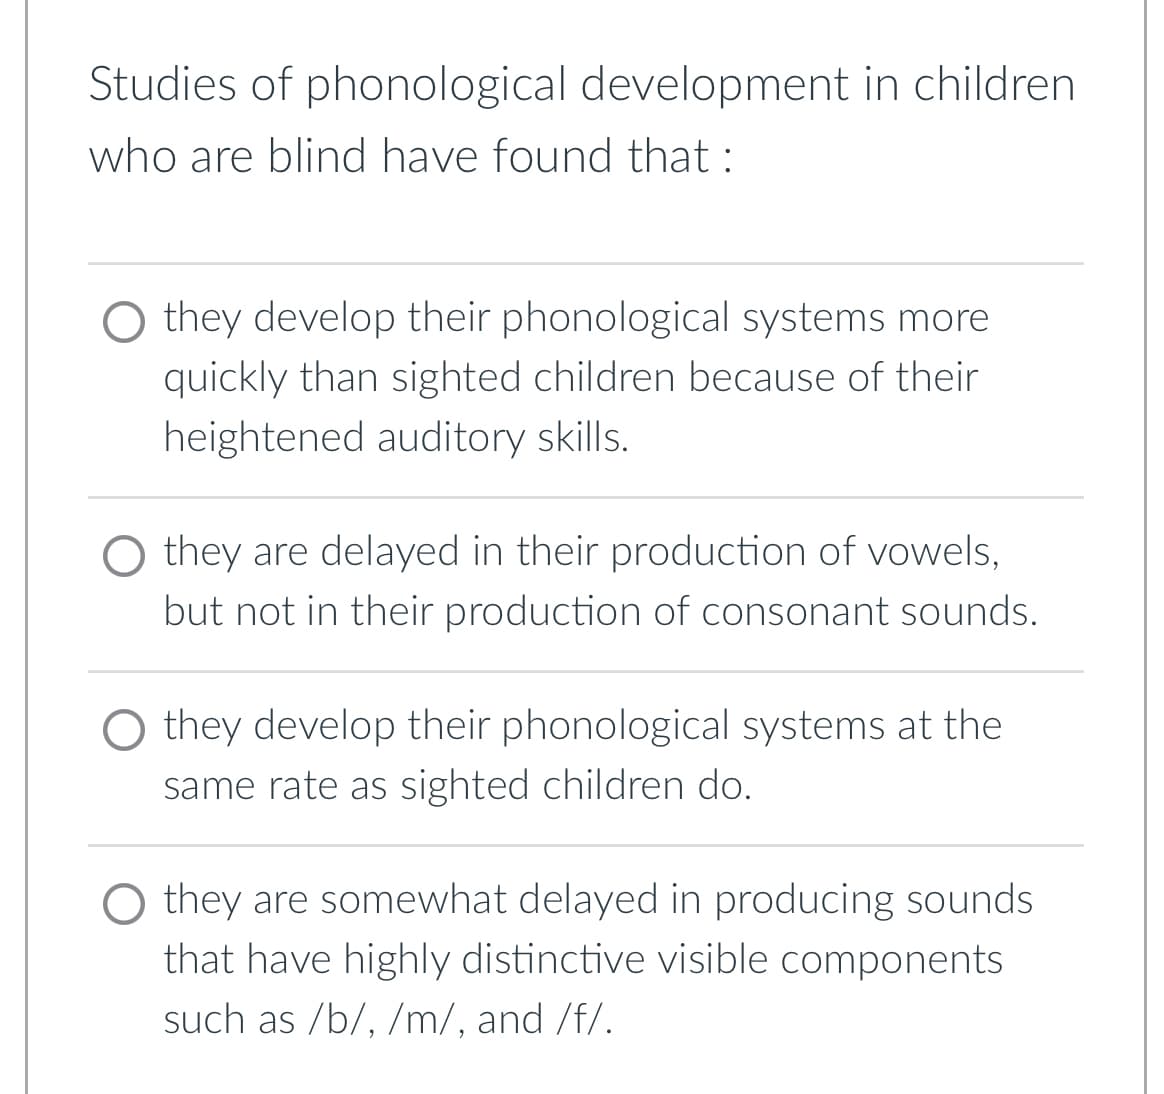 Studies of phonological development in children
who are blind have found that:
they develop their phonological systems more
quickly than sighted children because of their
heightened auditory skills.
O they are delayed in their production of vowels,
but not in their production of consonant sounds.
they develop their phonological systems at the
same rate as sighted children do.
O they are somewhat delayed in producing sounds
that have highly distinctive visible components
such as /b/, /m/, and /f/.